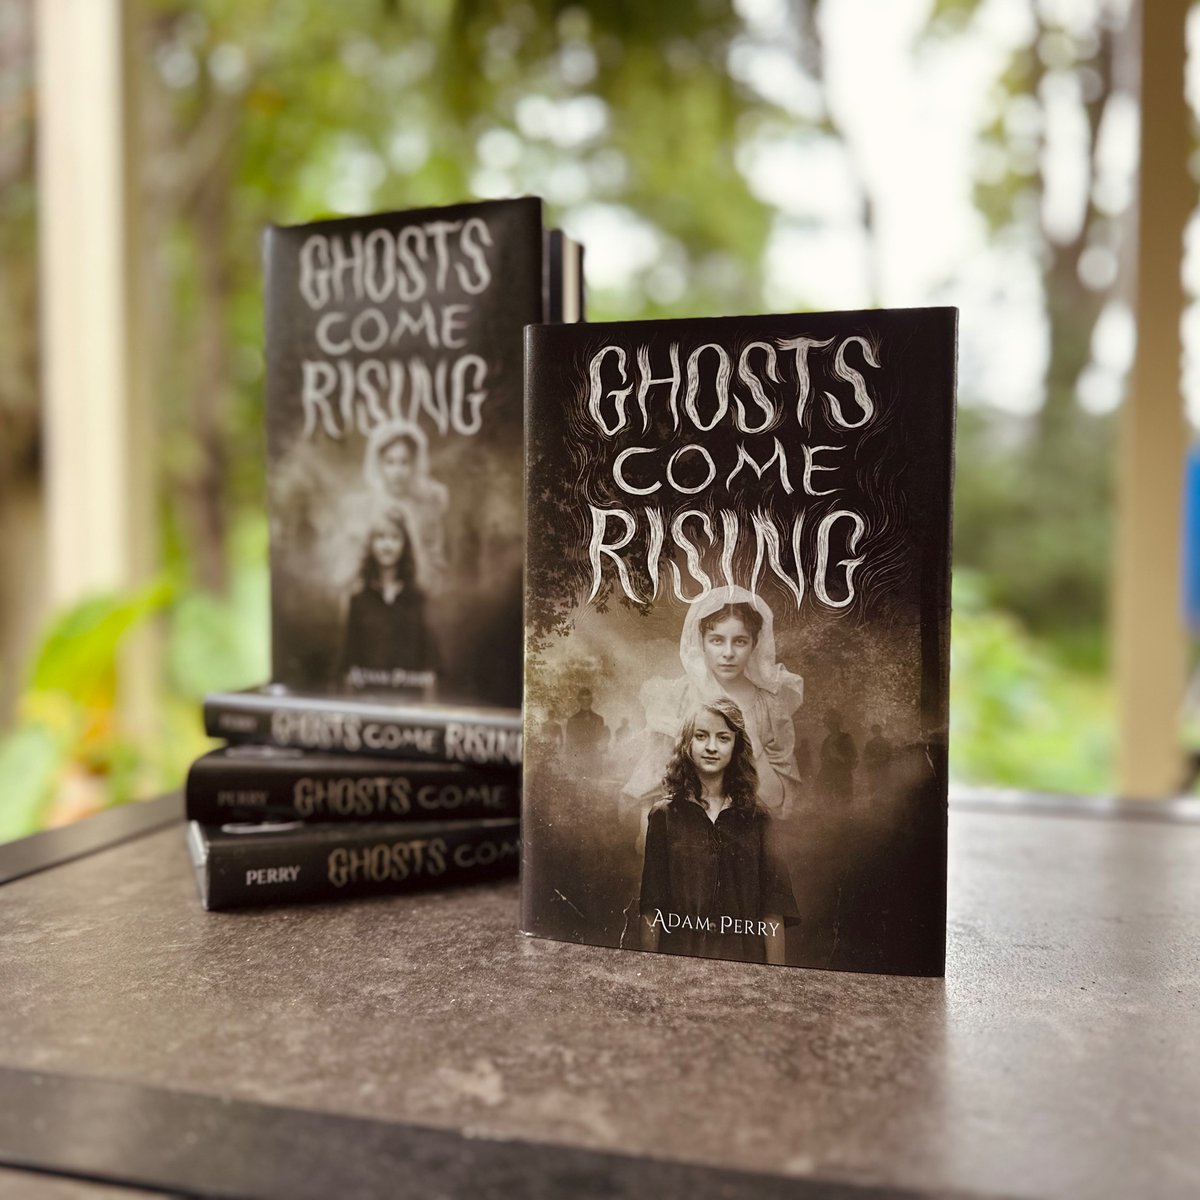 Fall is here and I am giving away 5 copies of my #middlegrade book GHOSTS COME RISING. 

Just follow and retweet to enter. Winners announced Oct. 3. 

Continental US only. 

#beeareader #BOOKGIVEAWAY